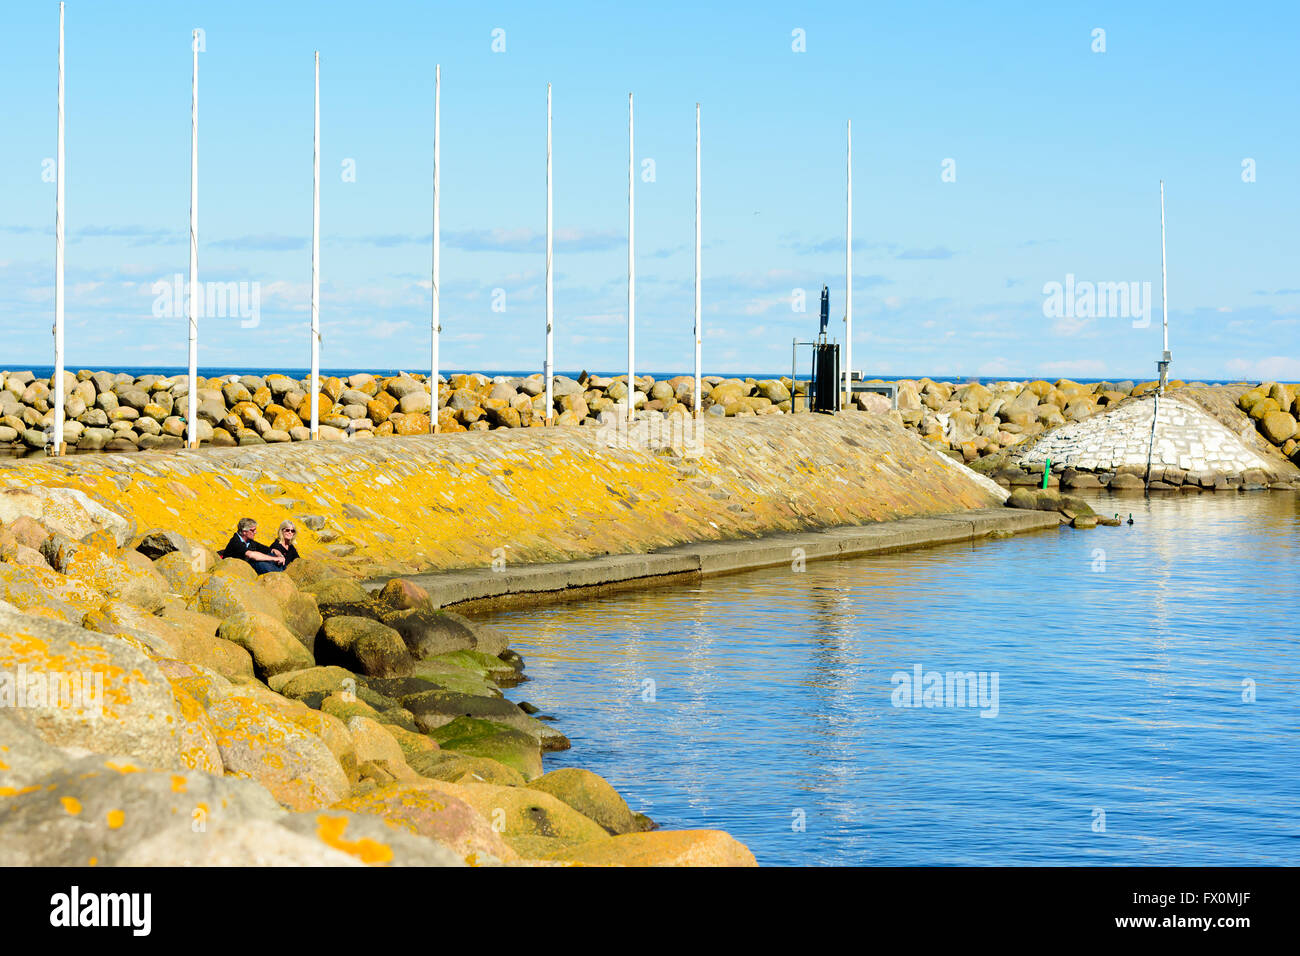 Simrishamn, Sweden - April 1, 2016: Two persons sit down by the stone pier and enjoy the warm sunshine on this fine spring day. Stock Photo